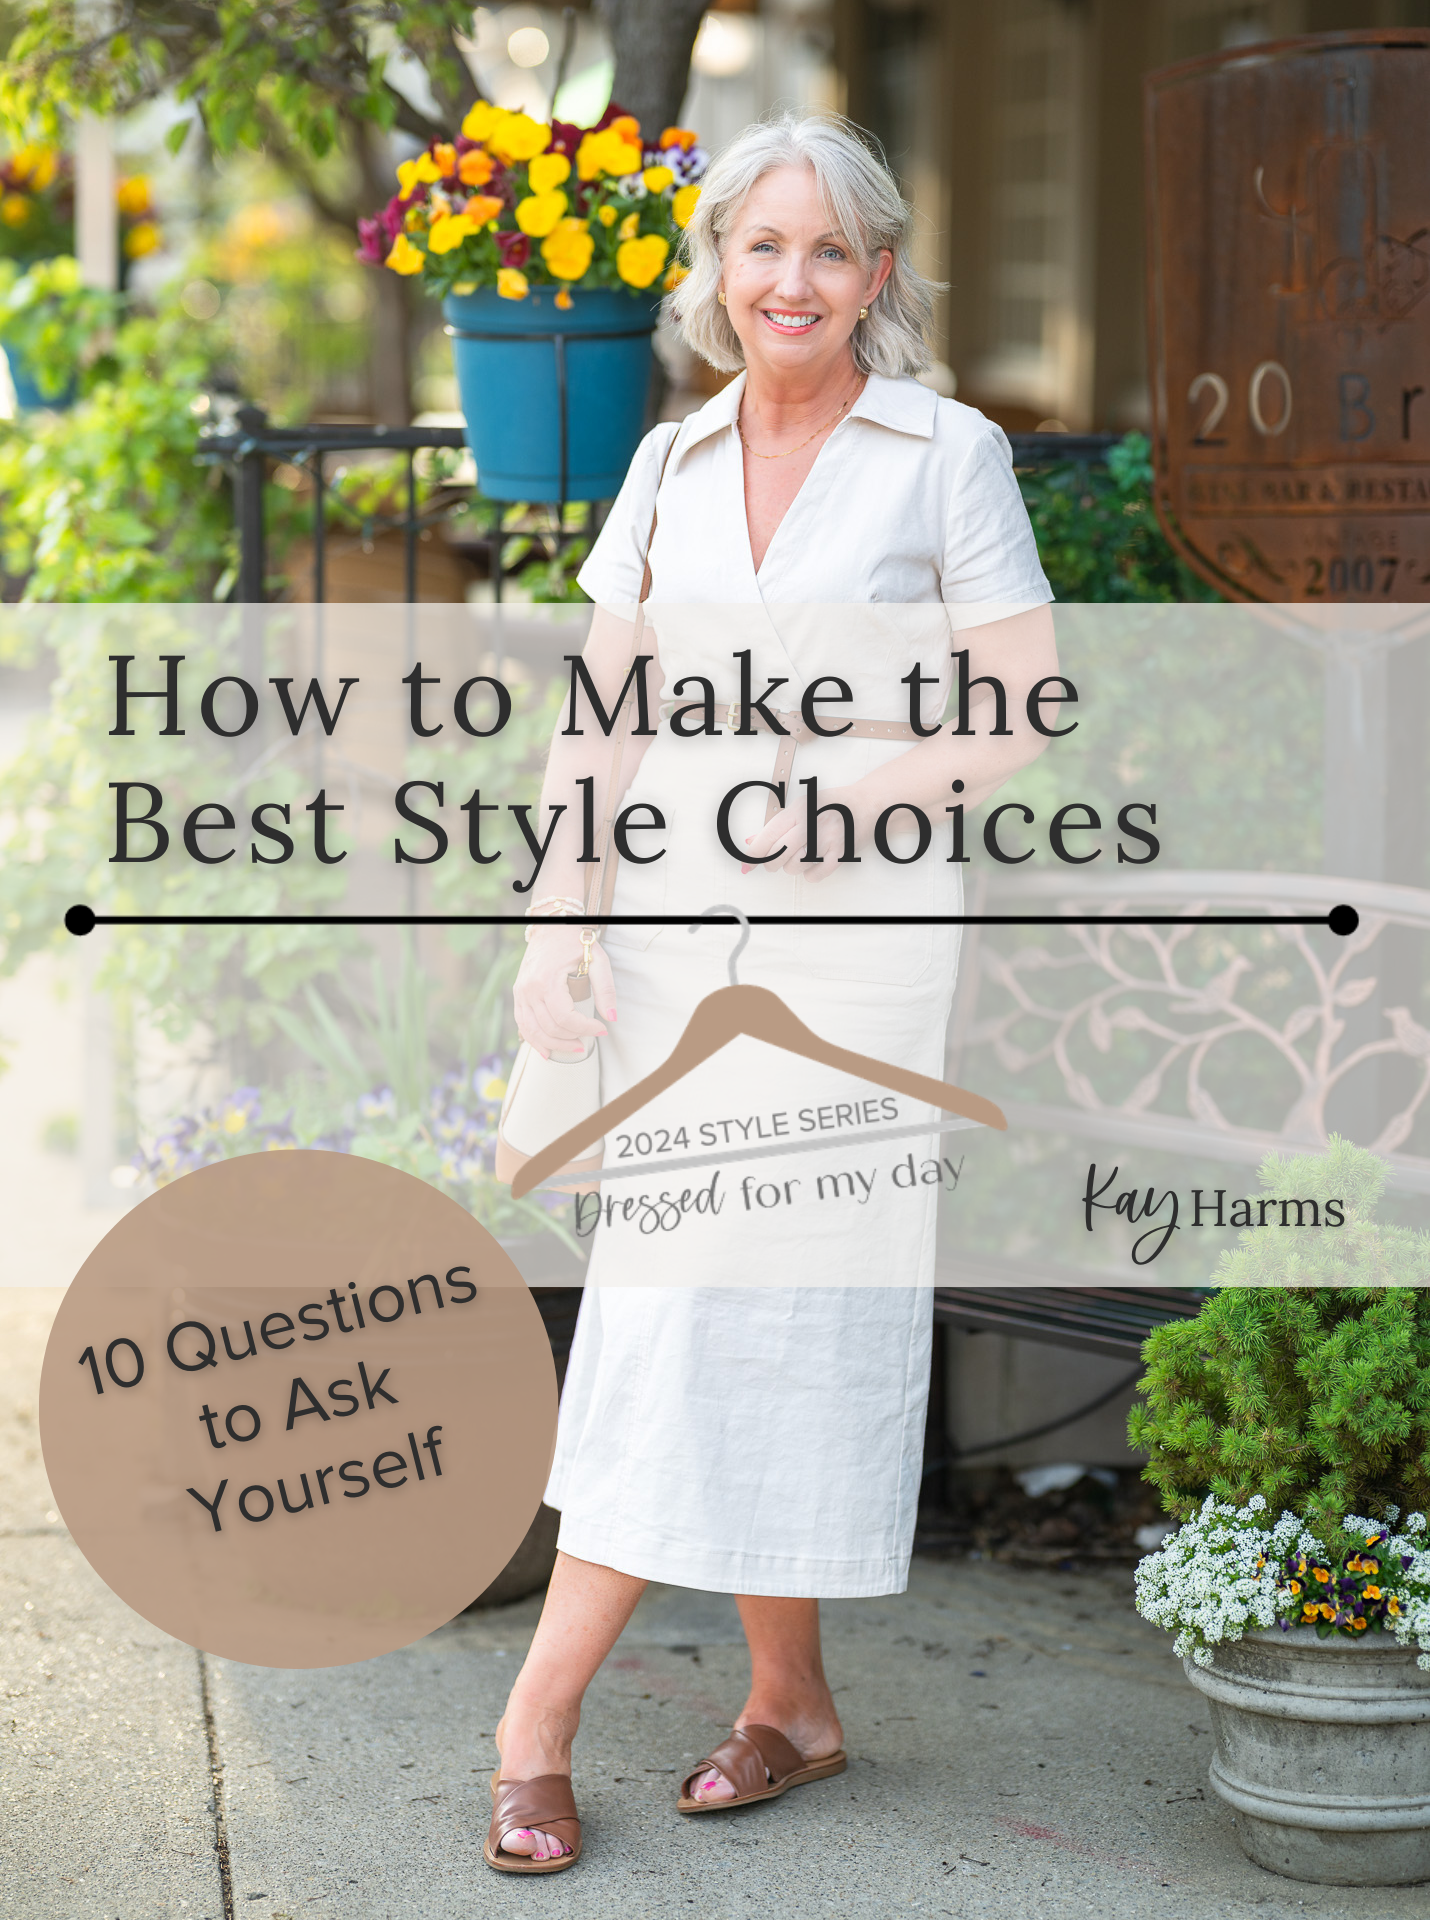 10 Questions to Help You Make the Best Style Choices